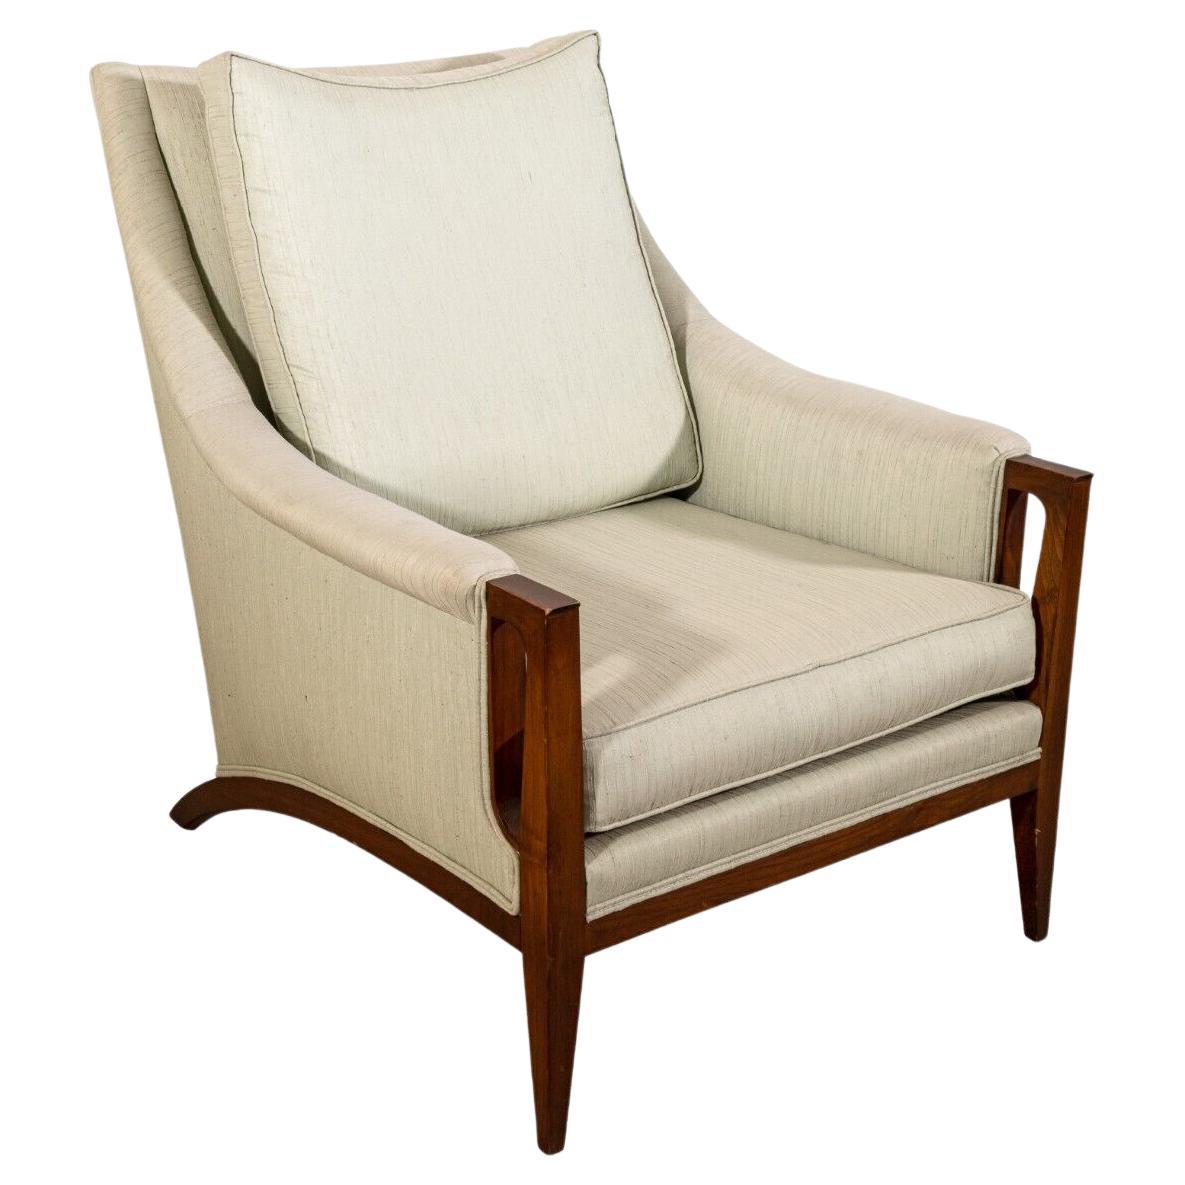 A Robsjohn Gibbings armchair and ottoman for Widdicomb. This fabulous lounge chair boasts an extraordinary silhouette, and a beautiful color combination. This armchair and ottoman combo feature a wood frame construction with a long arching curve